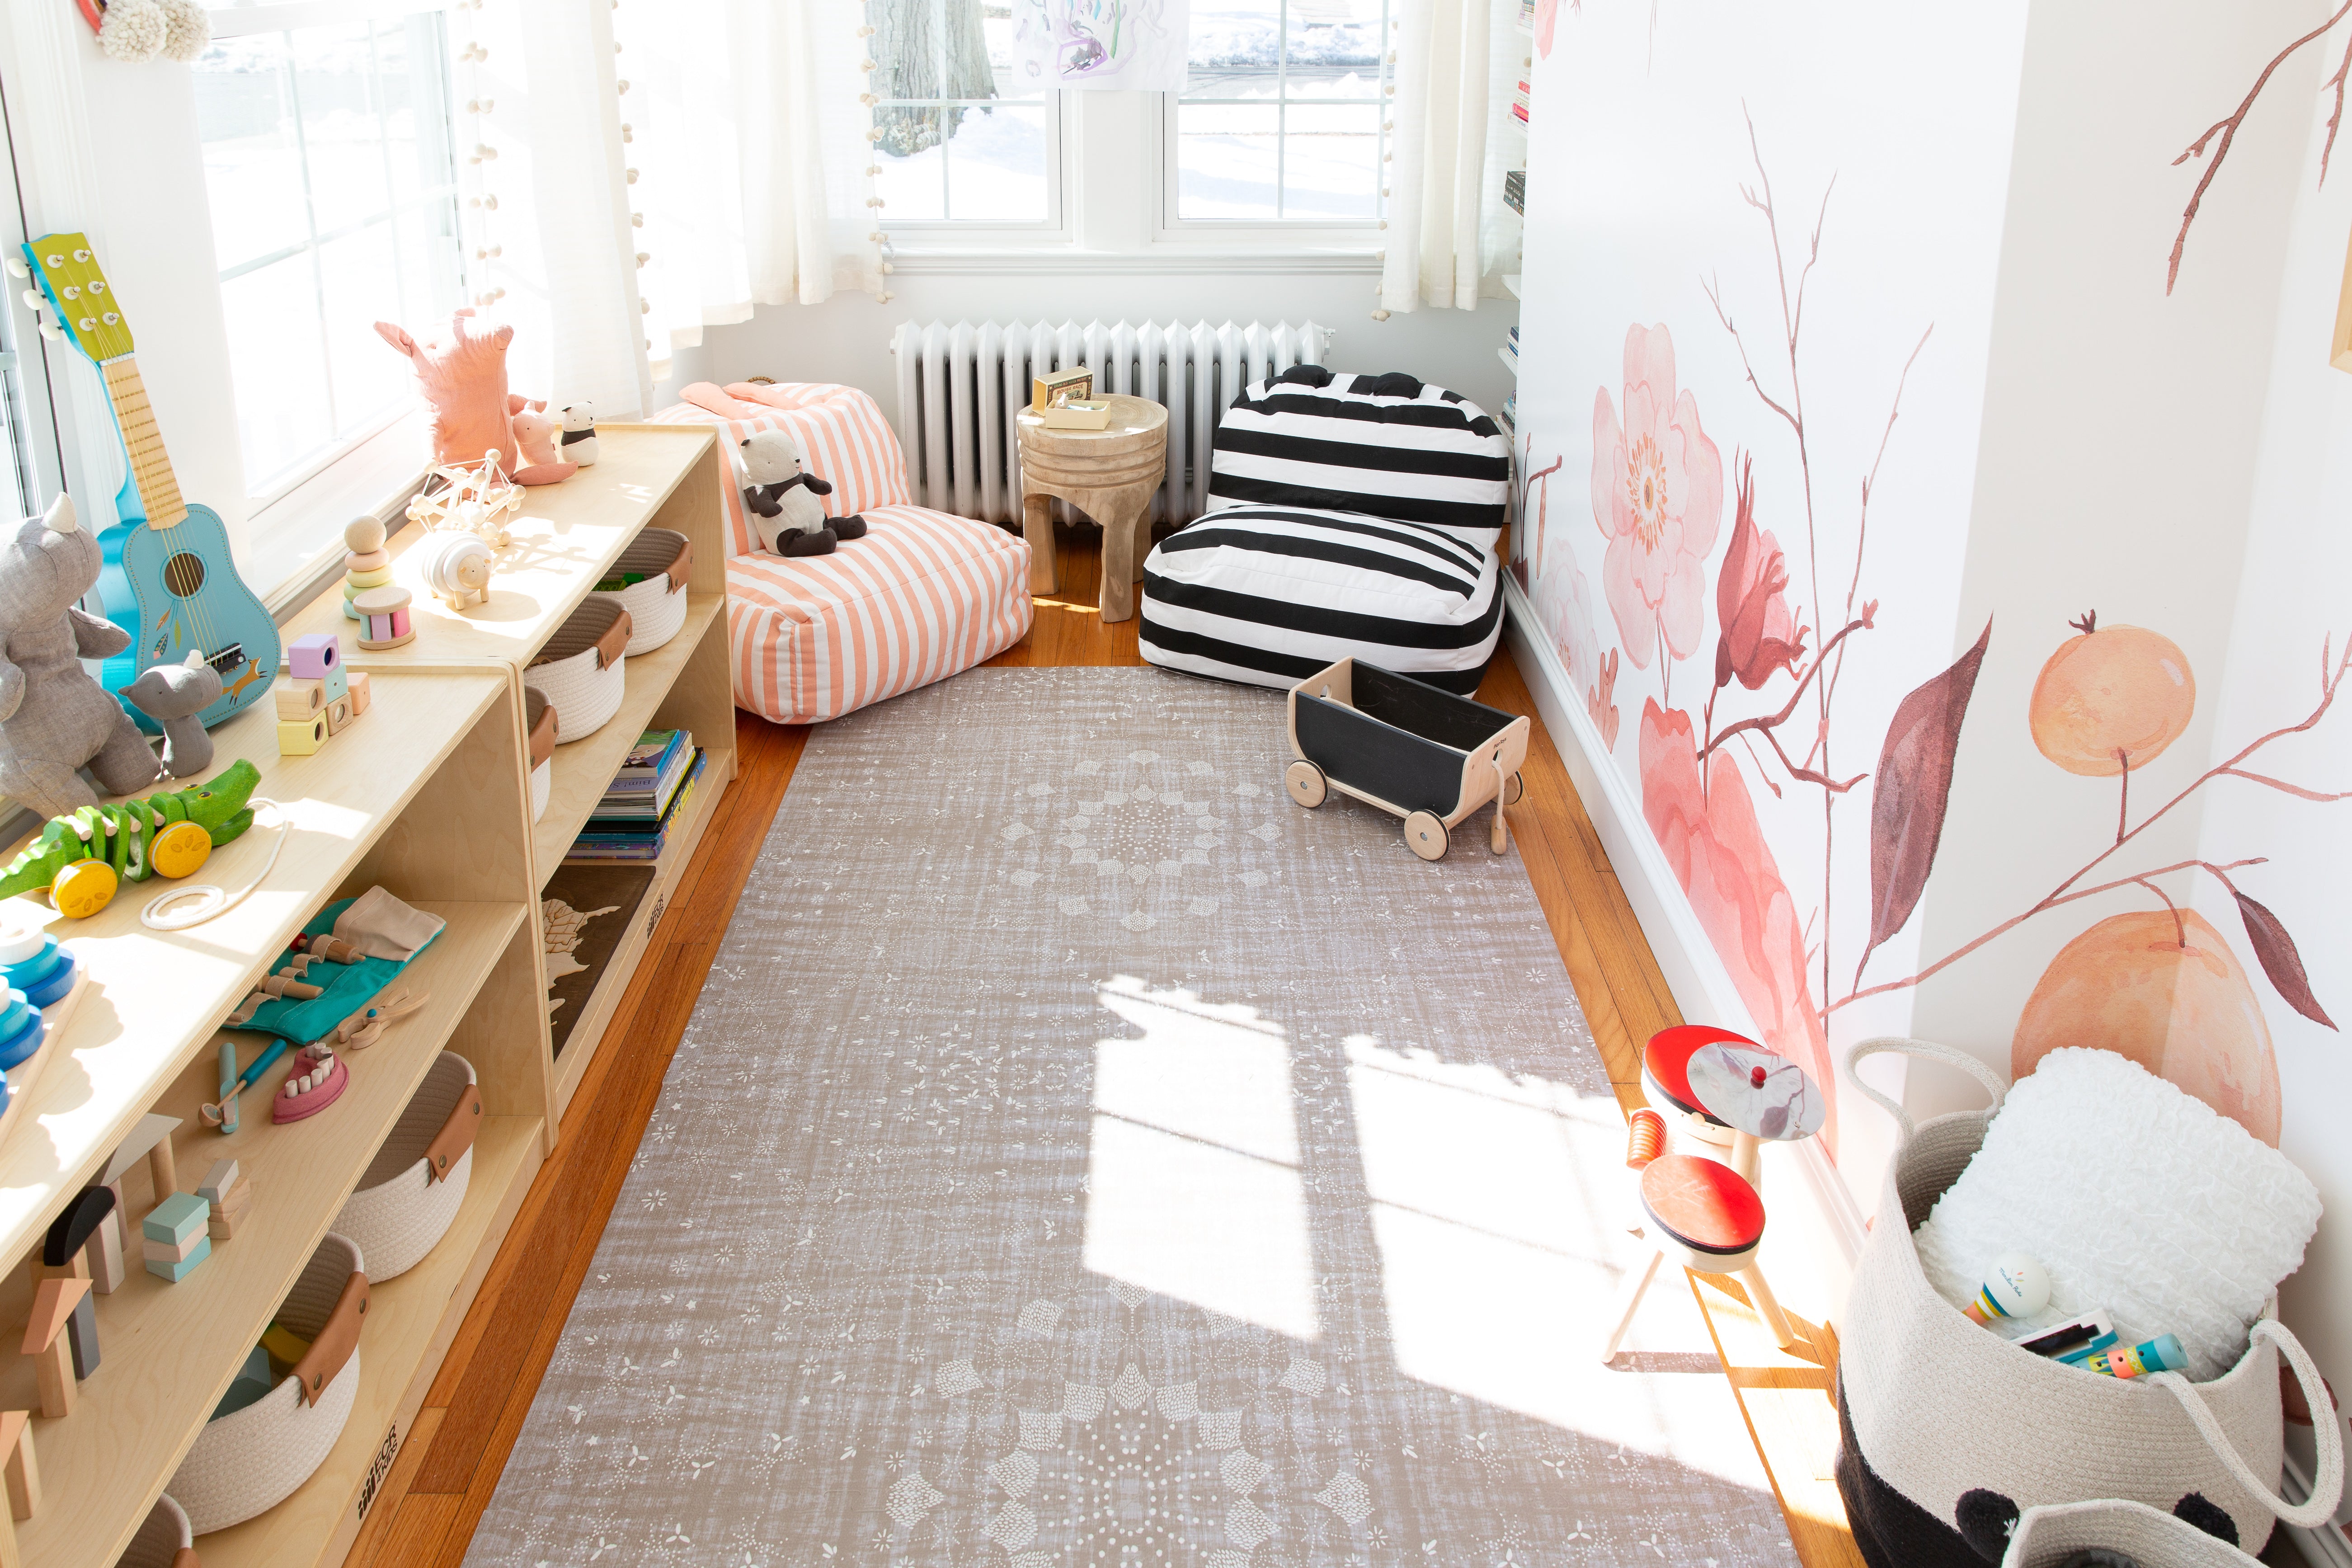 5 Simple Steps To Make Their Play Space Your Happy Place